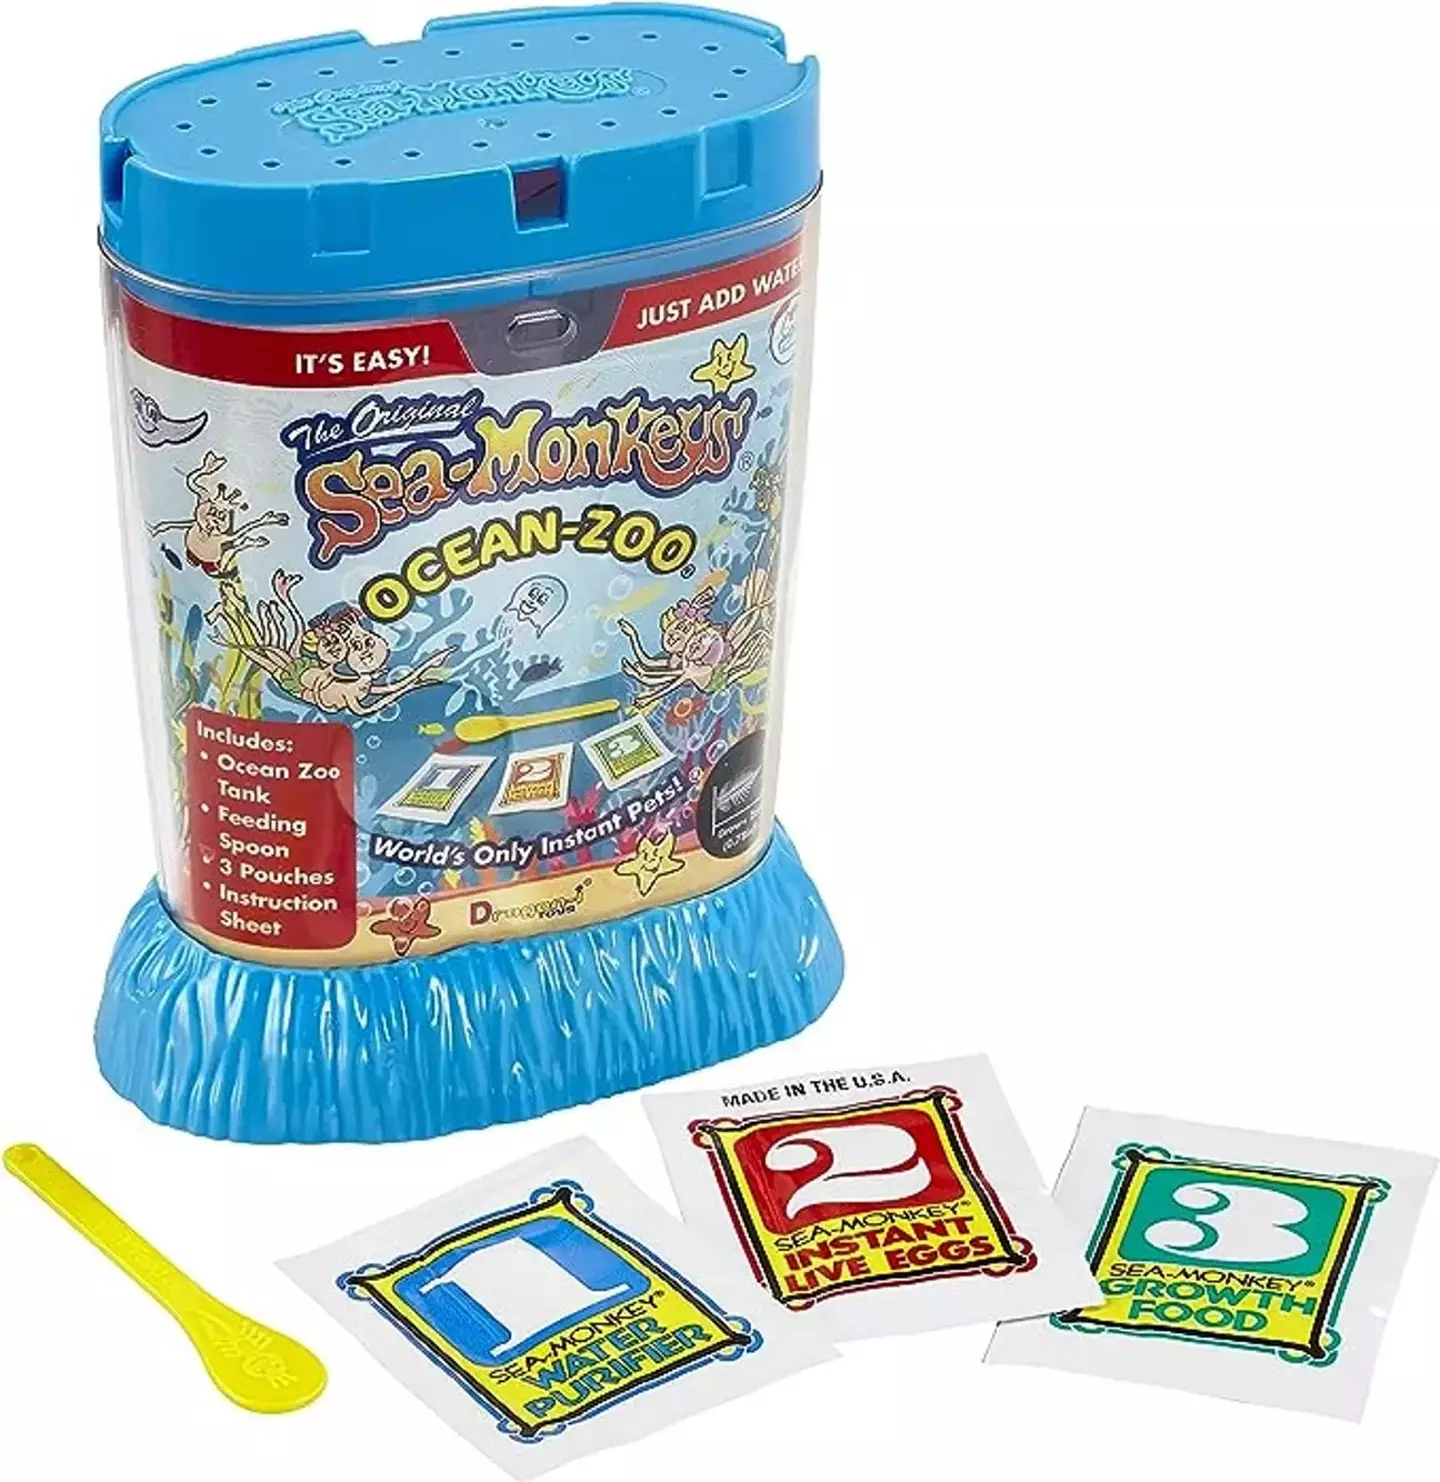 Sea Monkeys were extremely popular with kids growing up in the 1990s and 2000s.